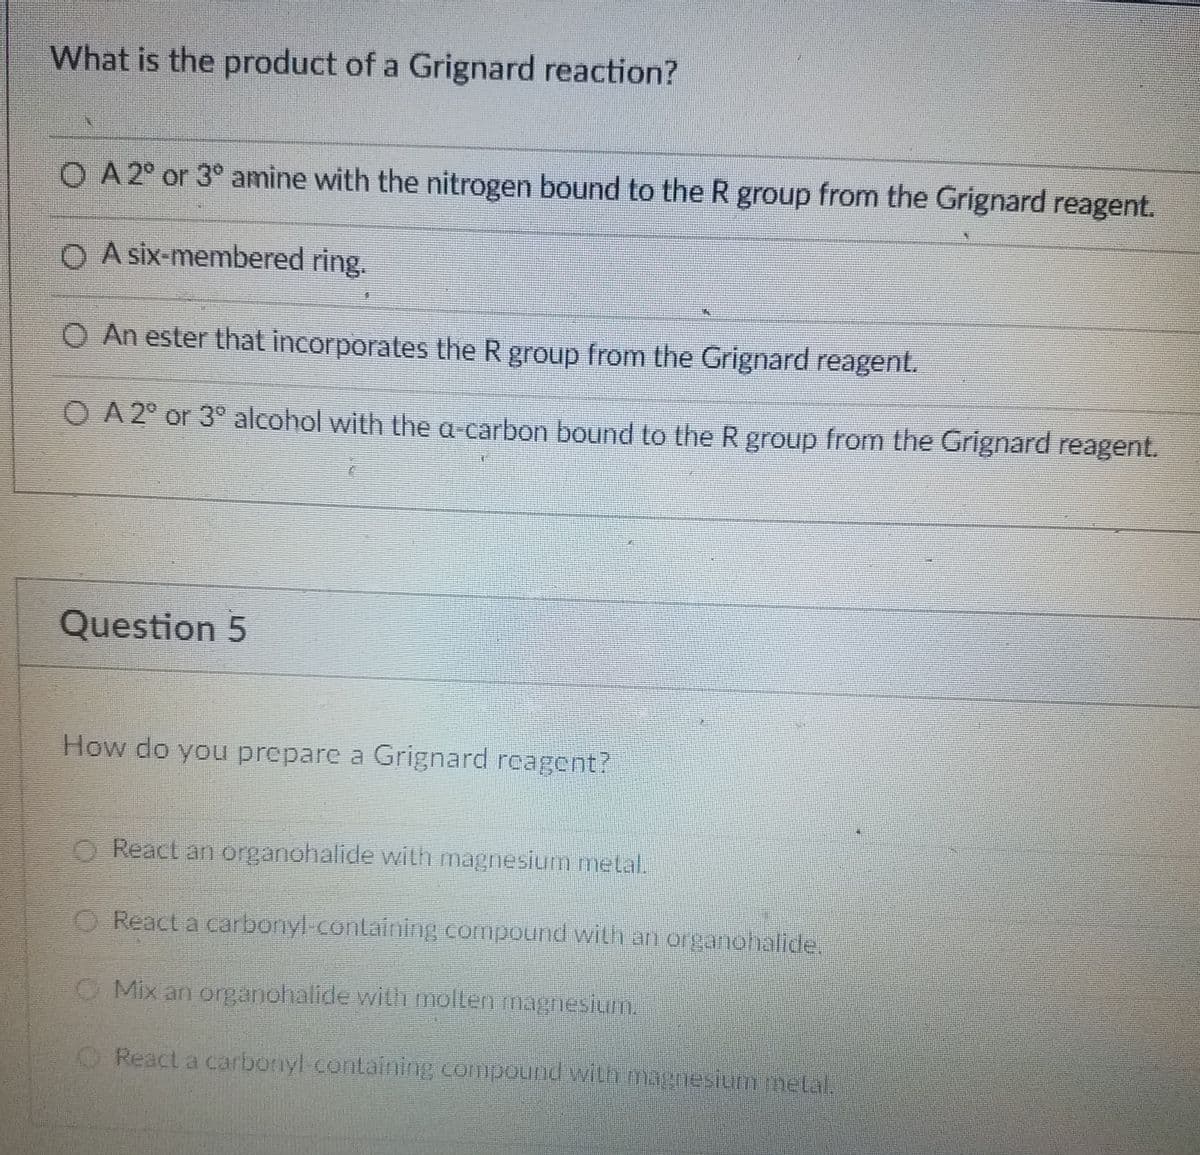 What is the product of a Grignard reaction?
O A 2° or 3° amine with the nitrogen bound to the R group from the Grignard reagent.
O A six-membered ring.
O An ester that incorporates the R group from the Grignard reagent.
O A 2° or 3° alcohol with the a carbon bound to the R group from the Grignard reagent.
Question 5
How do you prepare a Grignard reagent?
O React an organohalide with magnesium metal.
O React a carbonyl-containing compound with an organohalide.
O Mix an organohalide with mollen magneshum.
O React a carbonyl containing compound with magnesiummetal.
